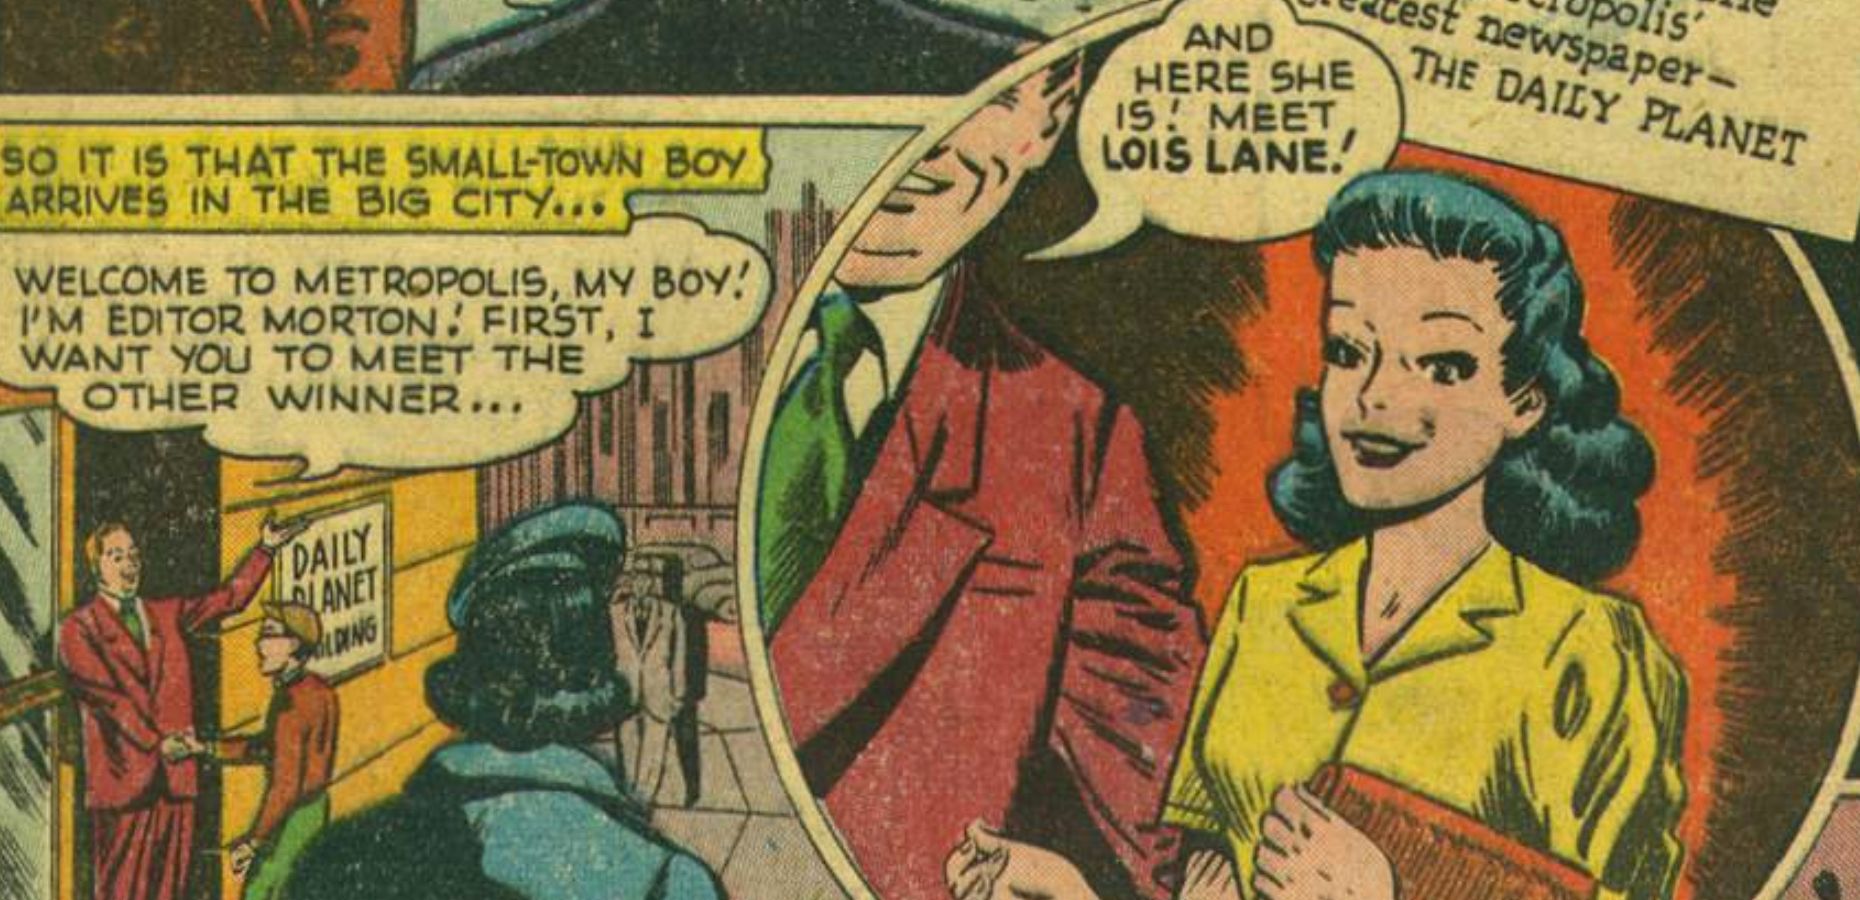 16 Things You Didnt Know About Lois Lane